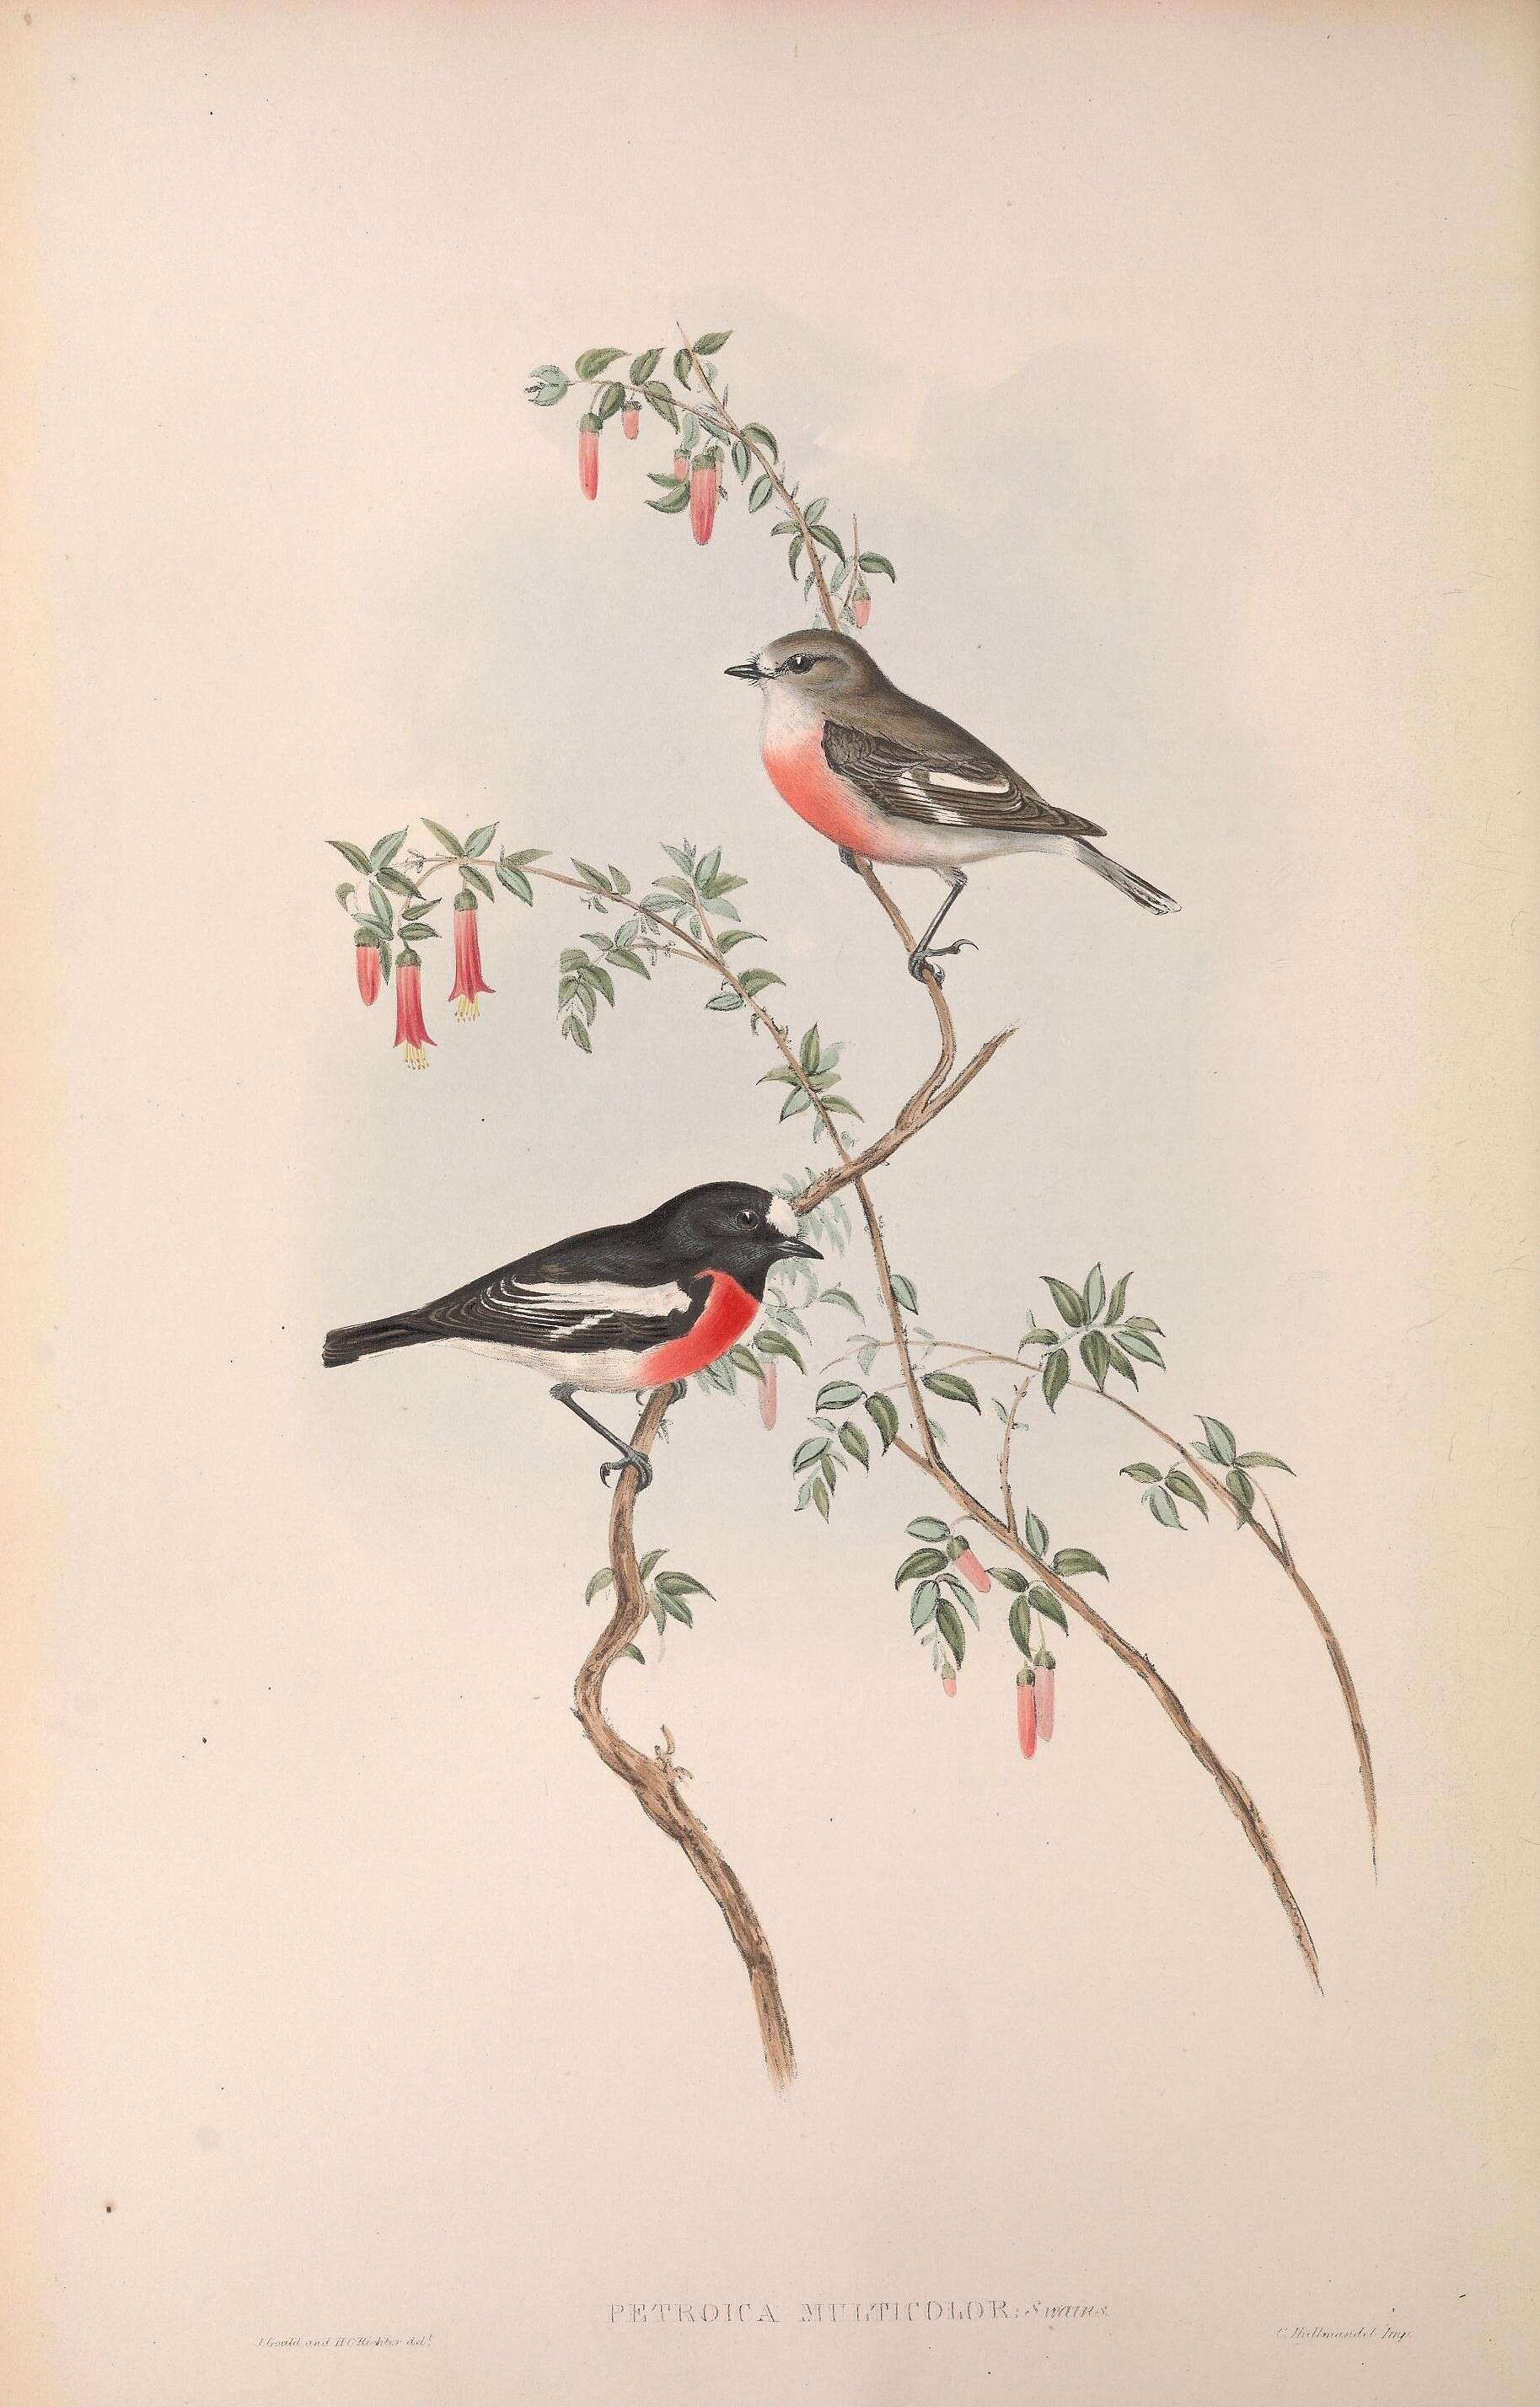 Image of Petroica Swainson 1829